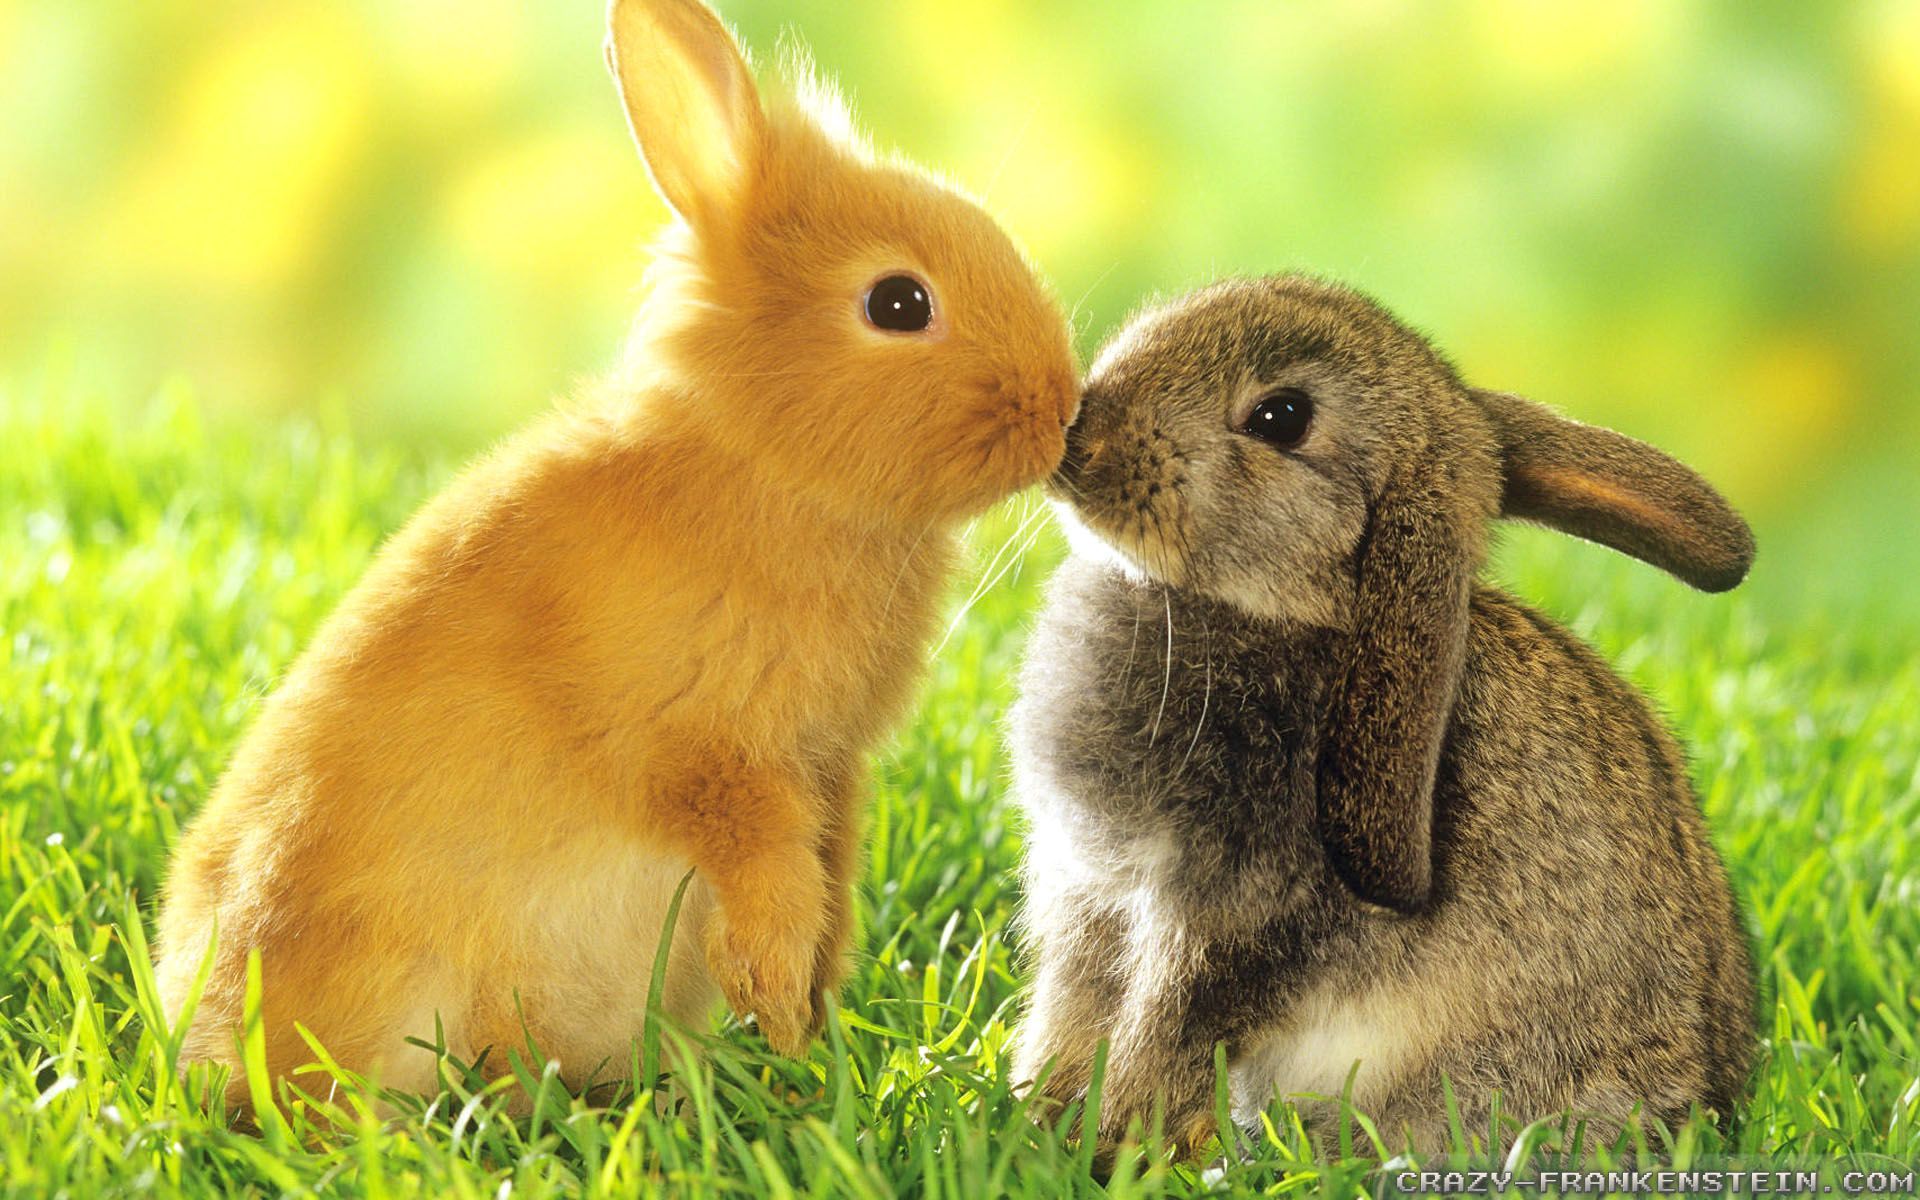 Events Spring Easter Wallpaper Easter Wallpaper. Cute animals puppies, Cute animals, Animals beautiful